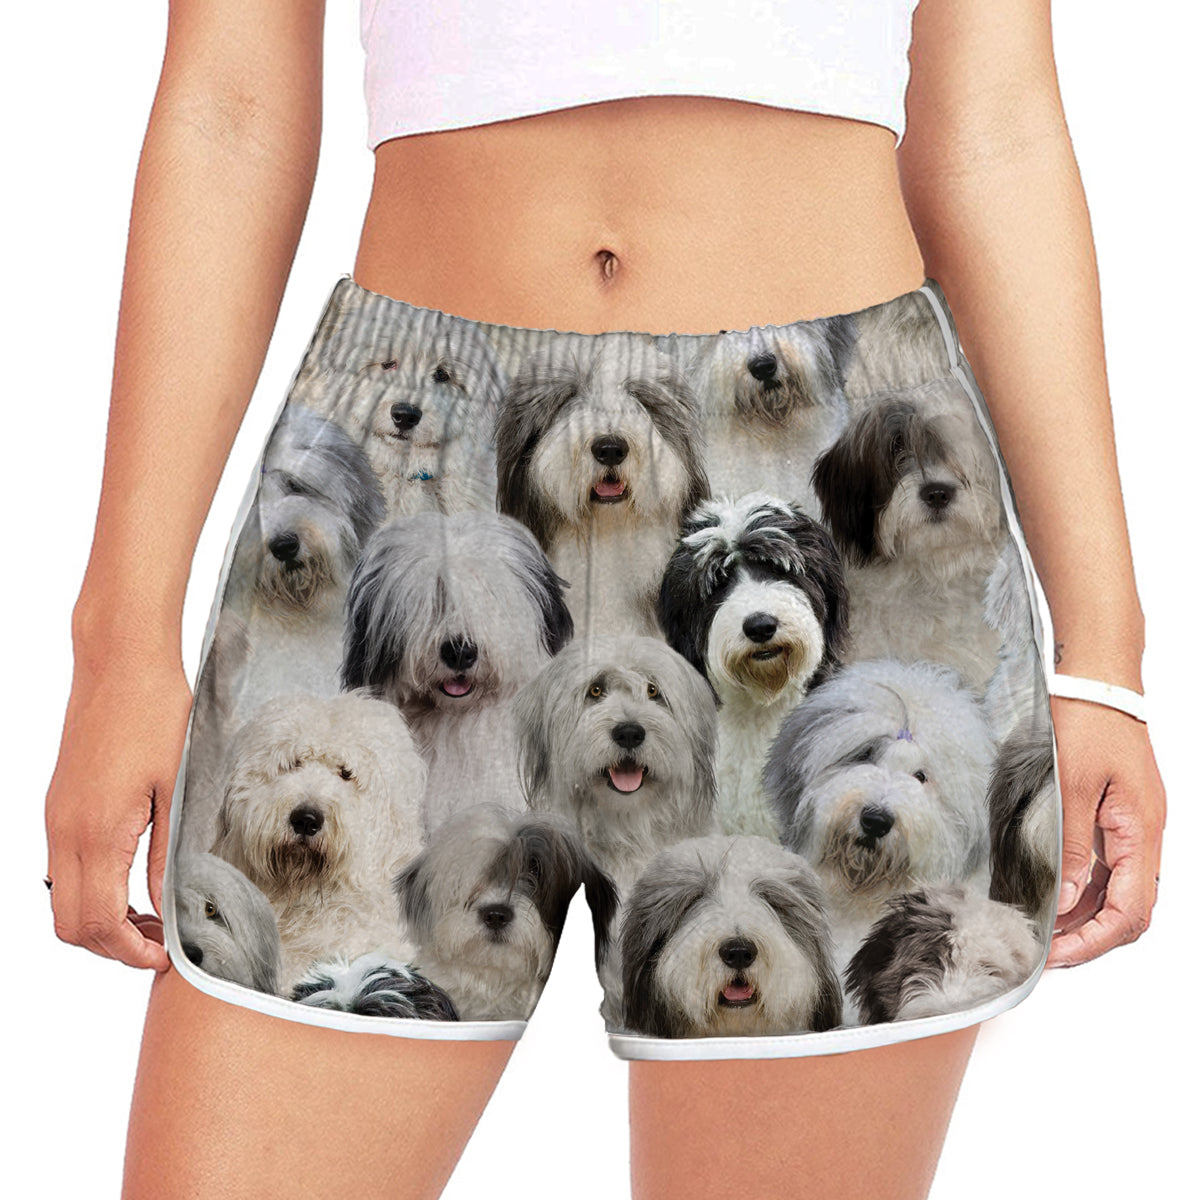 You Will Have A Bunch Of Old English Sheepdogs - Women's Running Shorts V1